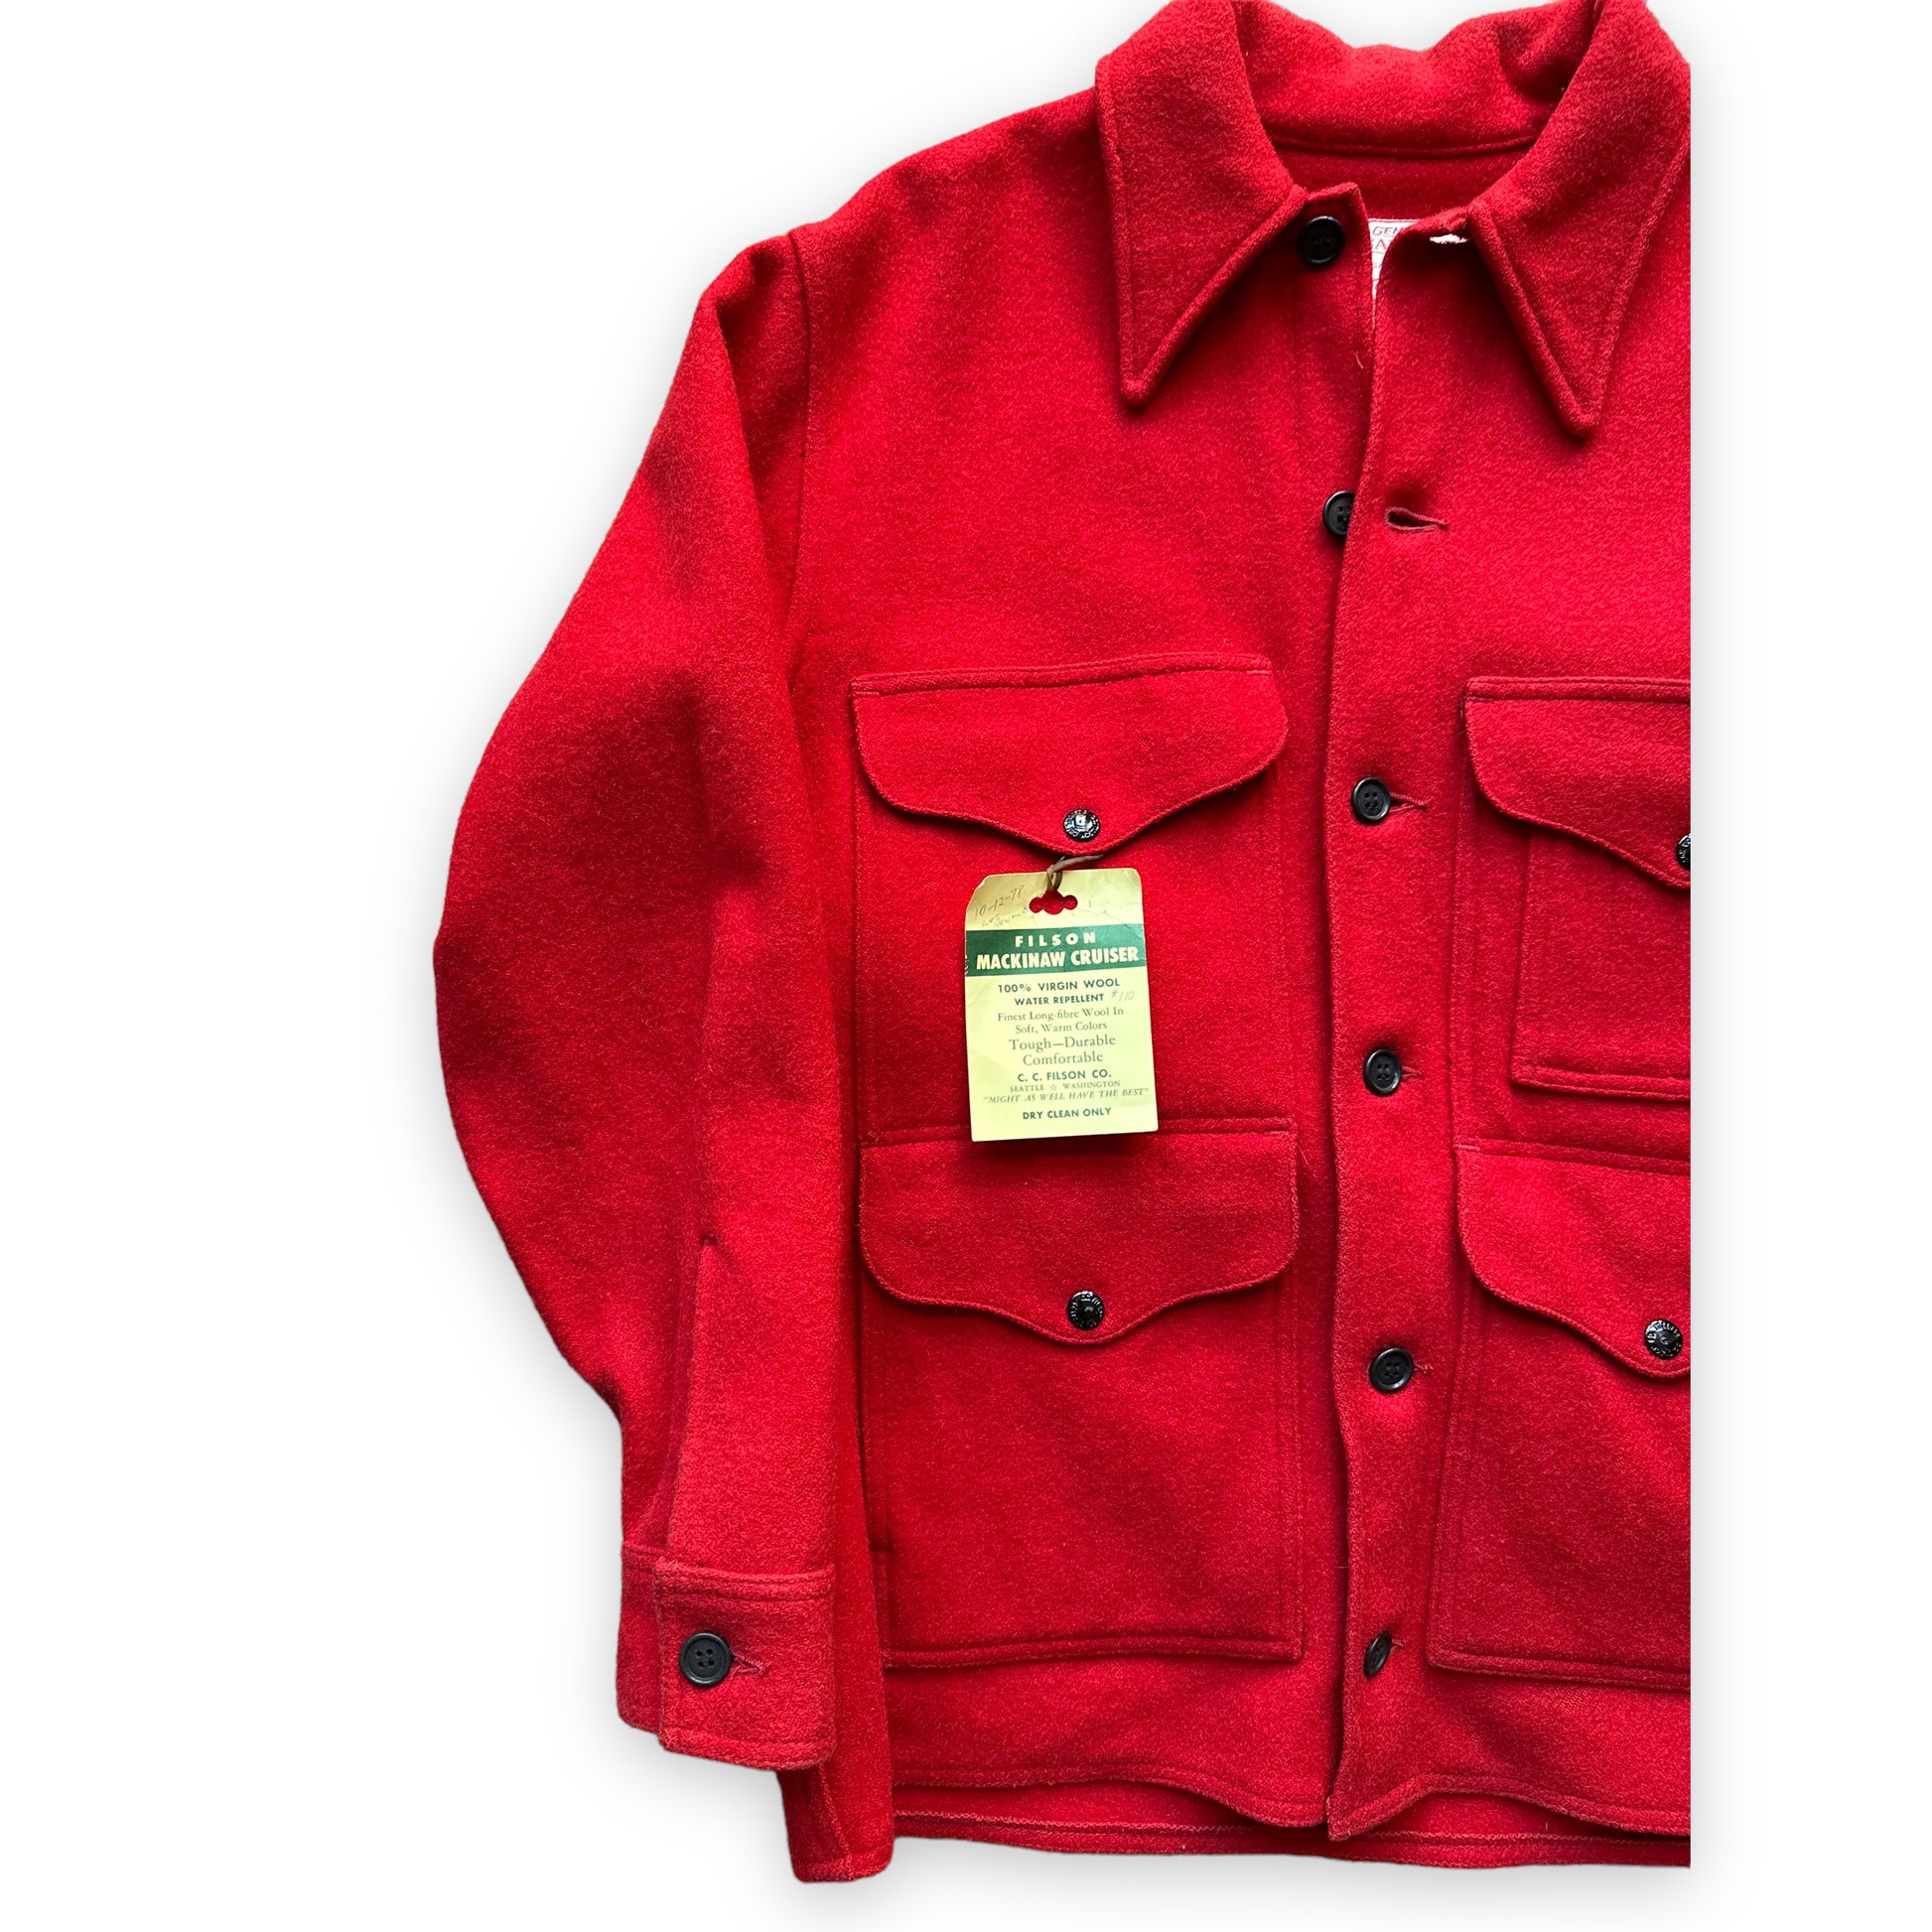 Right Front View of NOS Filson Scarlet Mackinaw Cruiser SZ 40 |  Deadstock Filson Scarlet Cruiser | Vintage Workwear Seattle